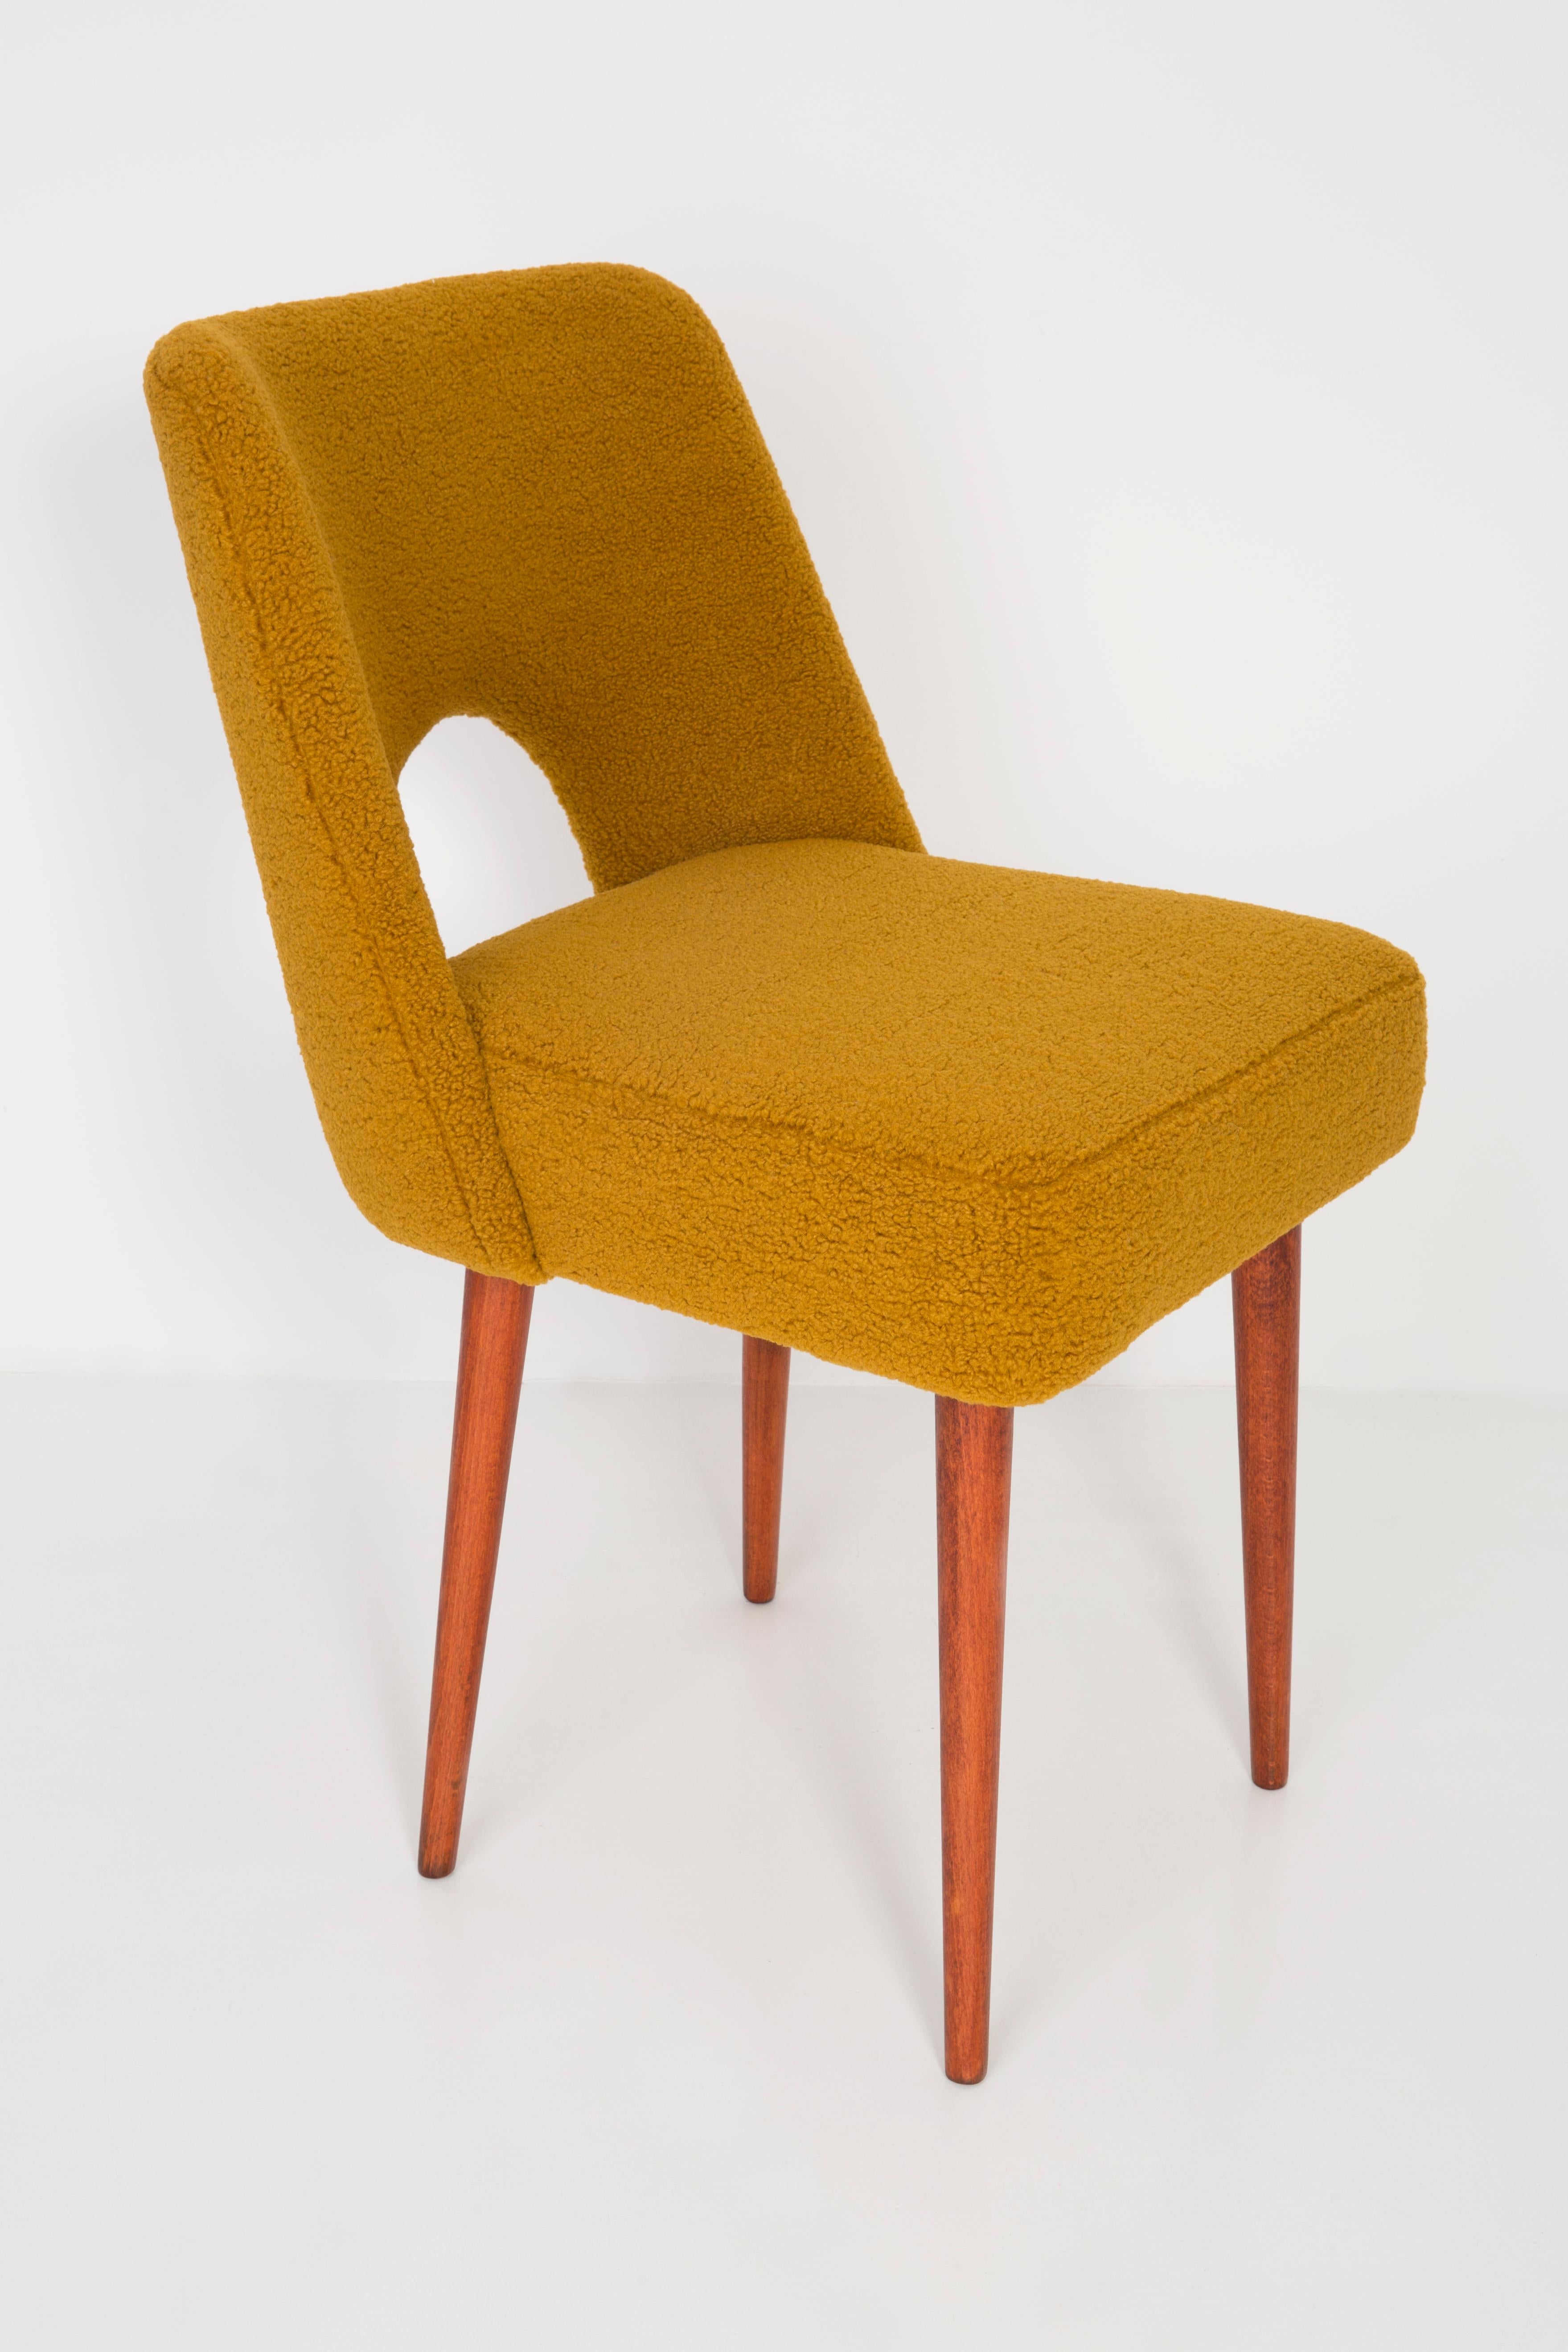 Hand-Crafted Set of Two Yellow Ochre Boucle 'Shell' Chairs, 1960s For Sale